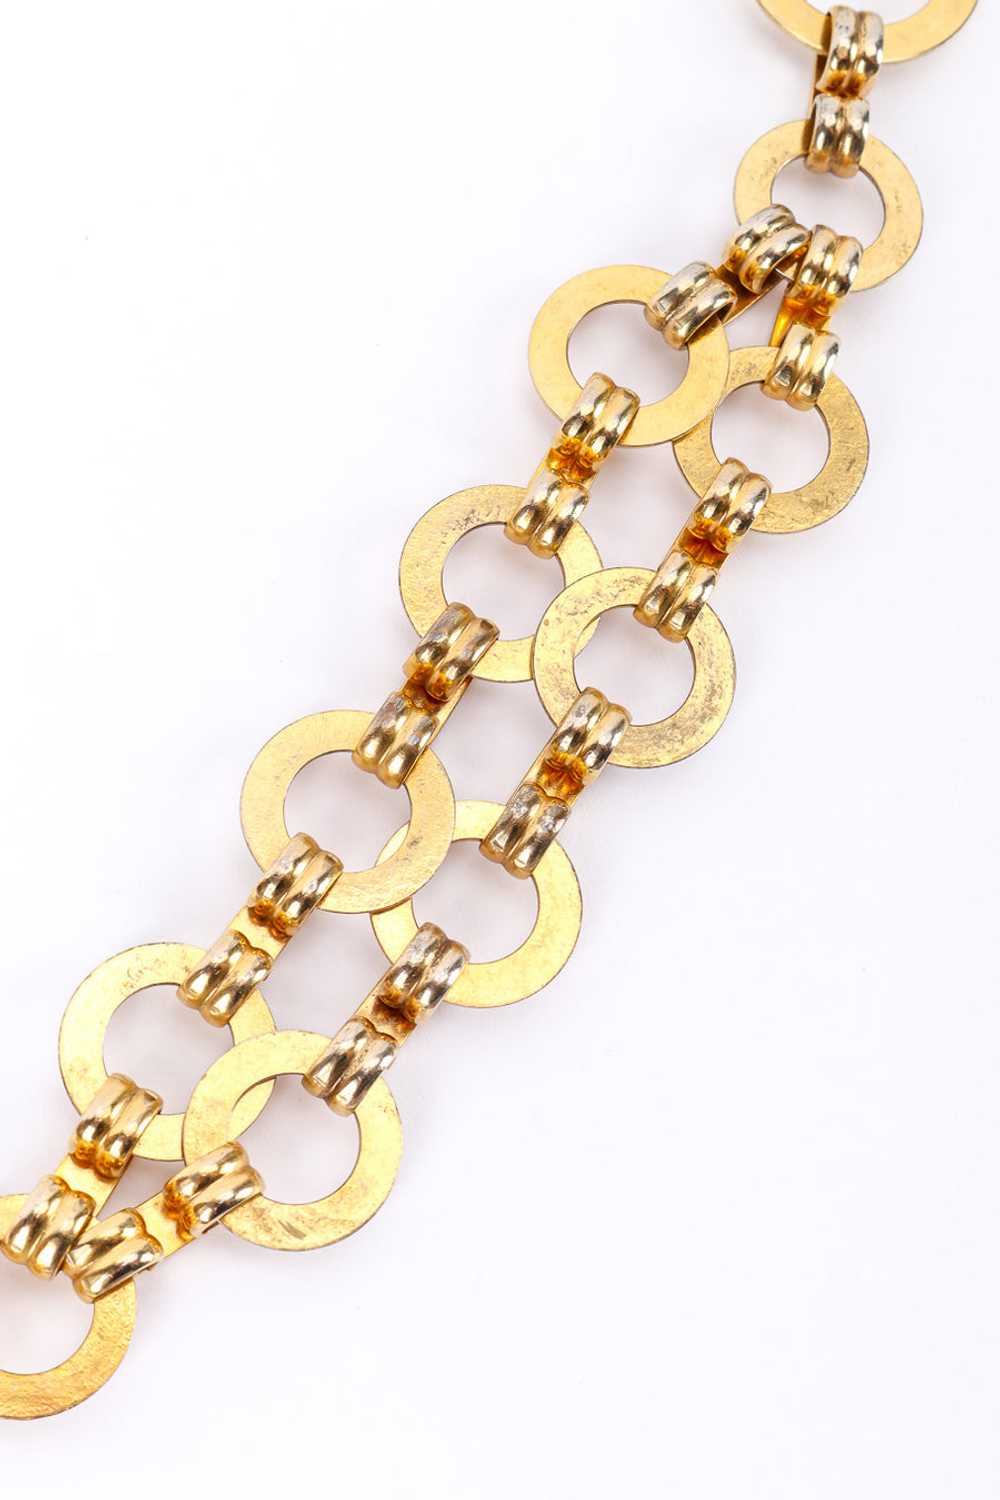 YSL Double Disc Chain Belt - image 5